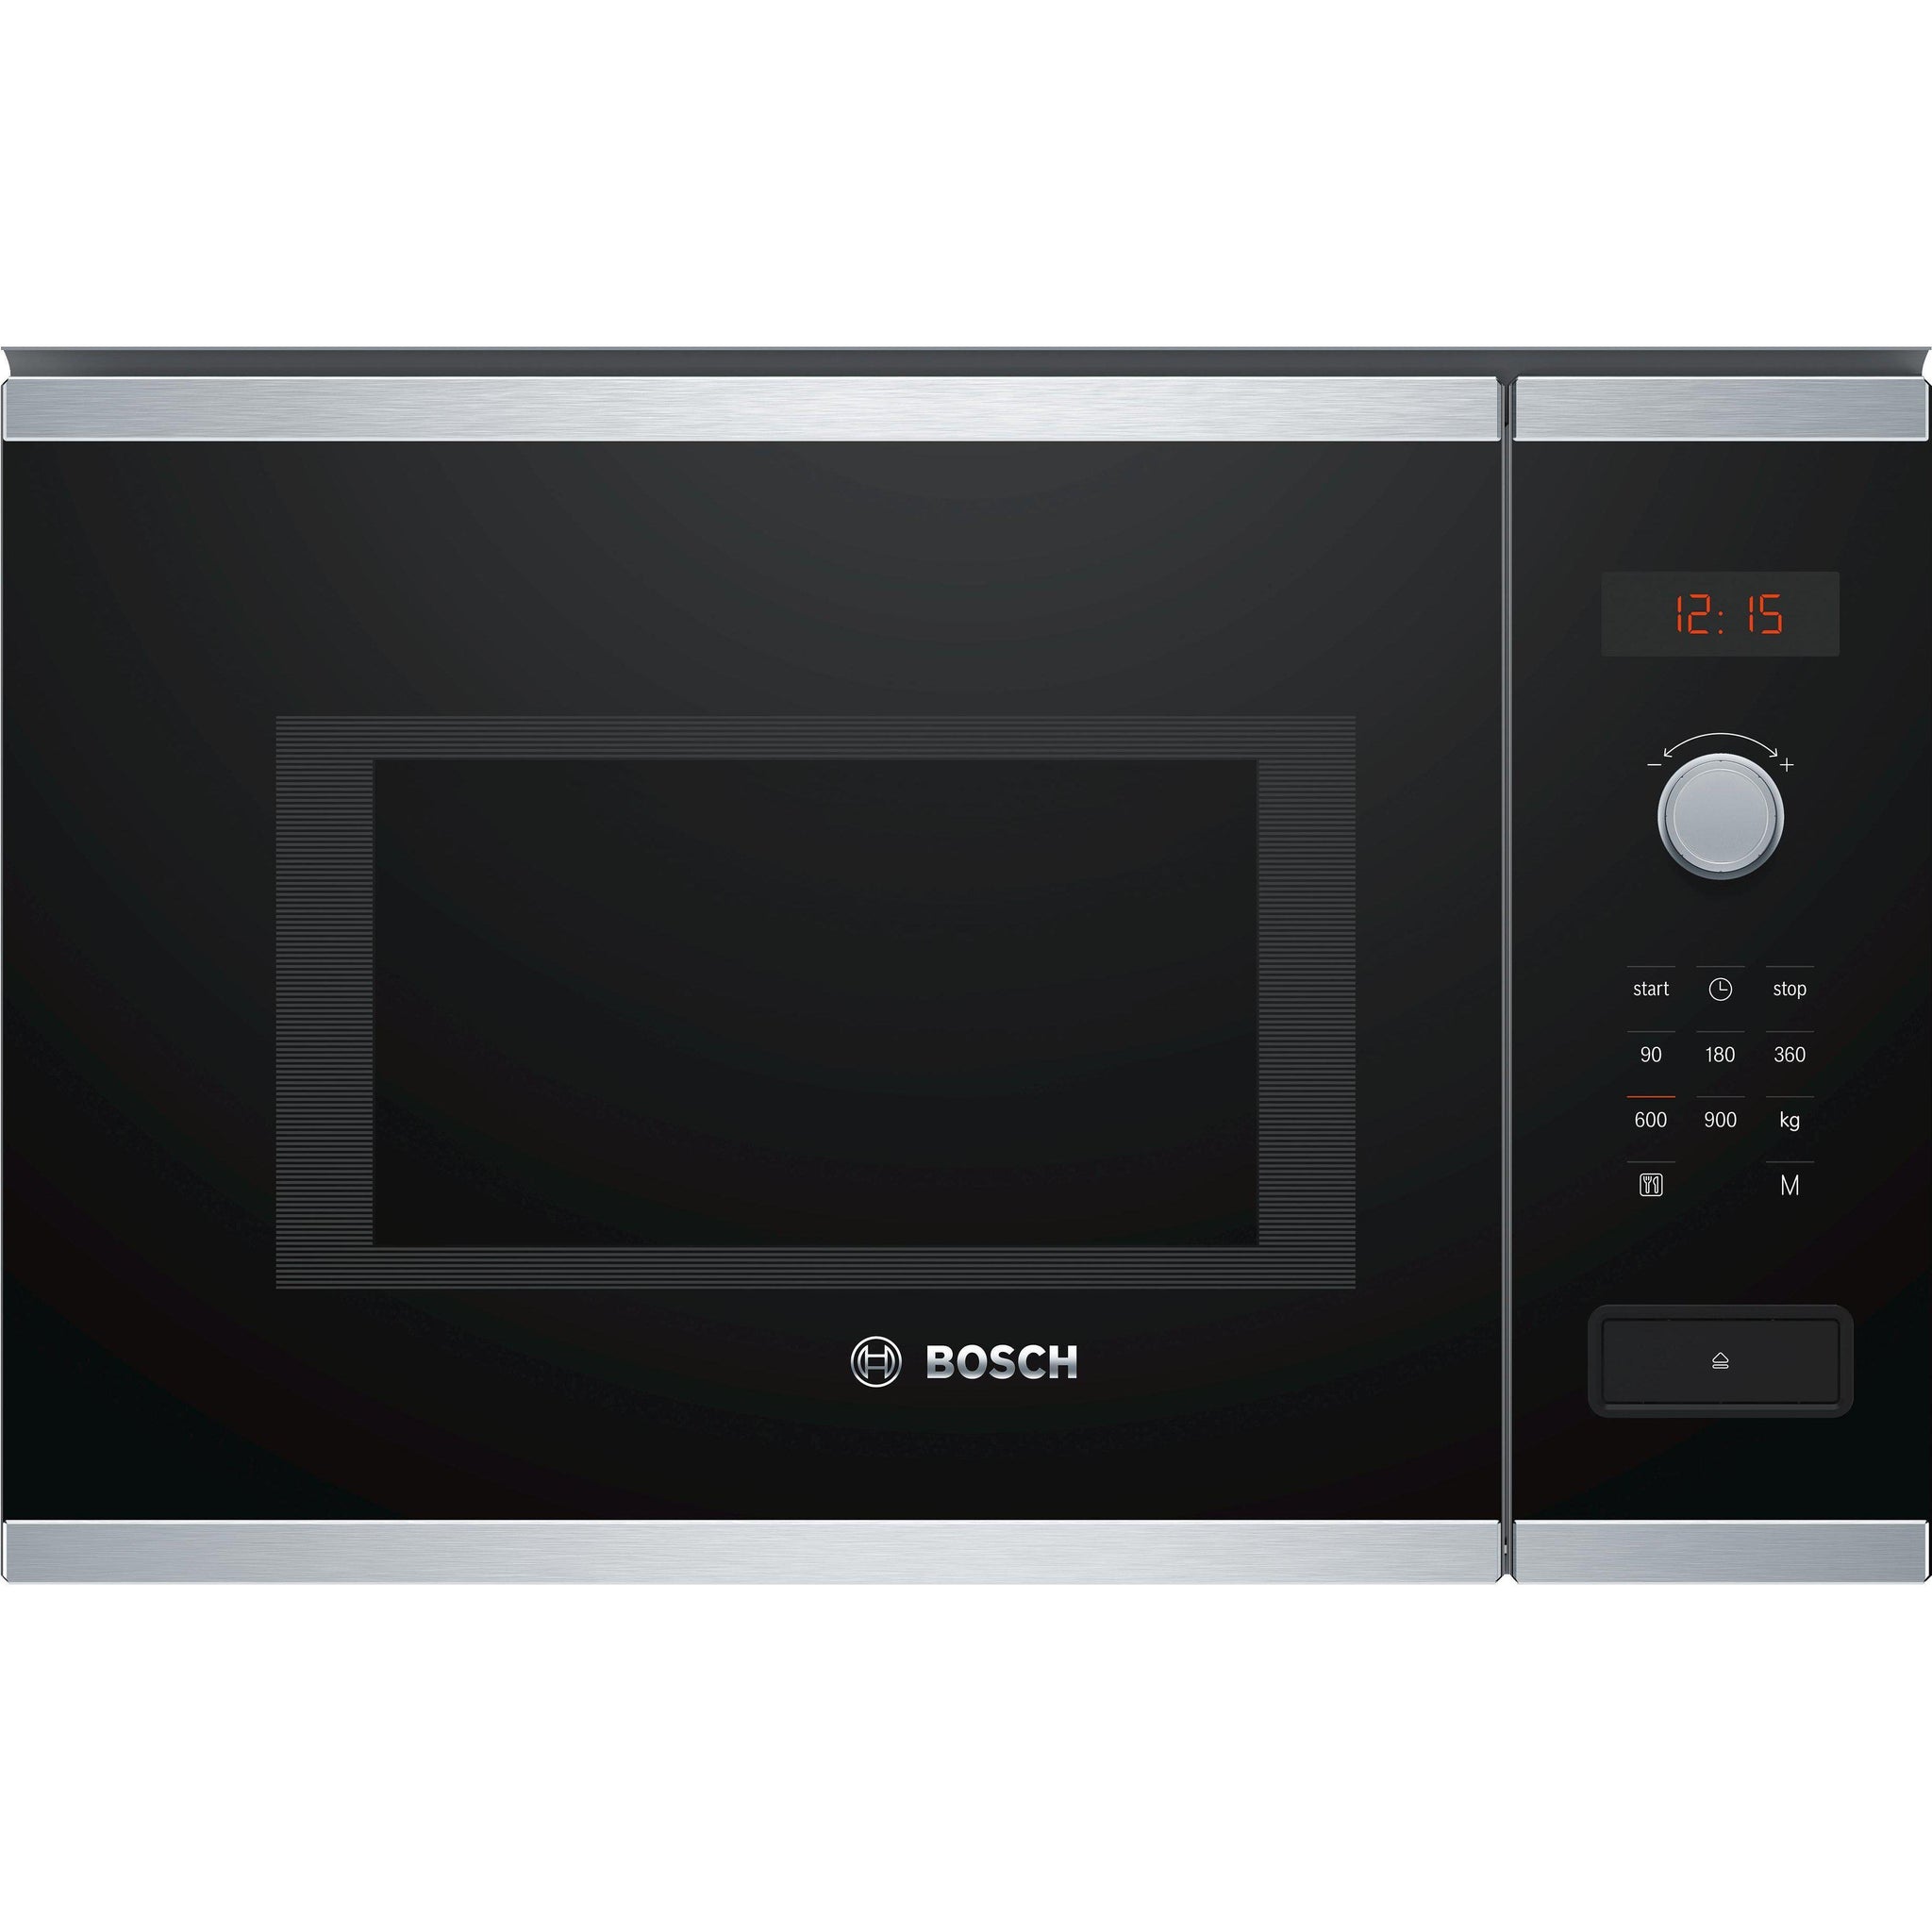 Bosch Serie 4 Bfl553ms0b Builtin Microwave Brushed Steel Delivery Within 710 Days